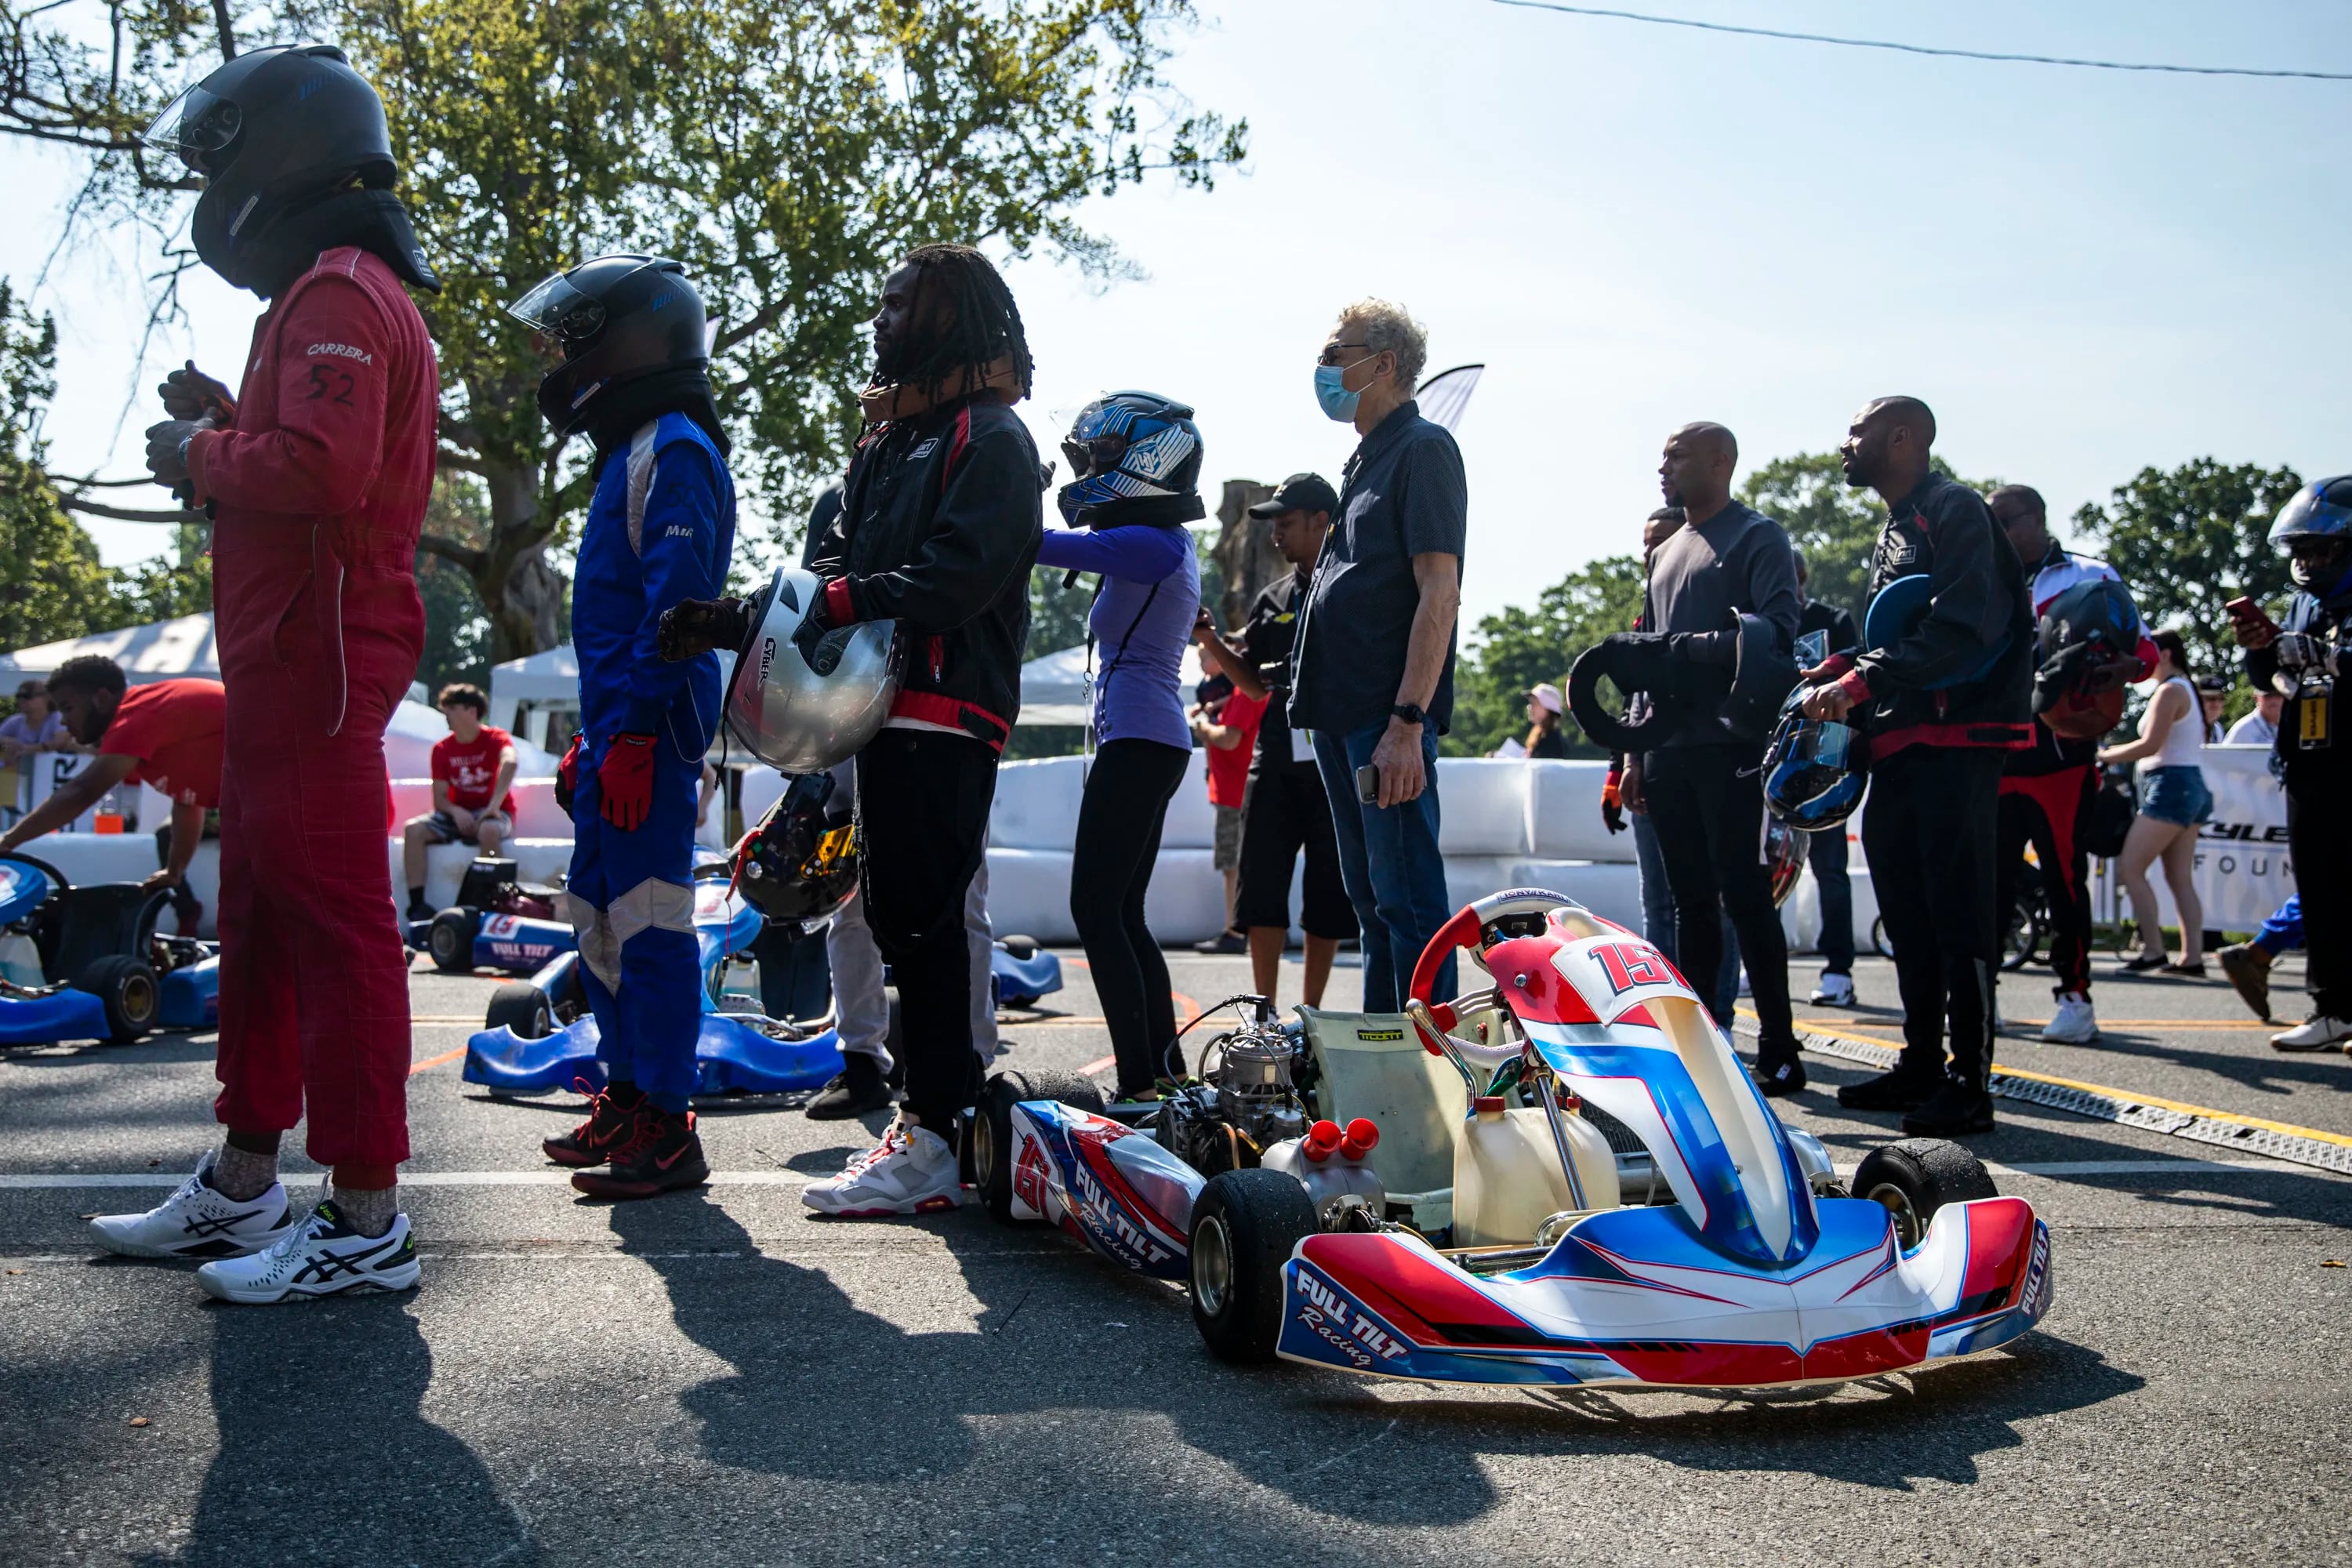 People line to hit the track on some racing carts in front of the Please Touch Museum in Philadelphia on Friday.

